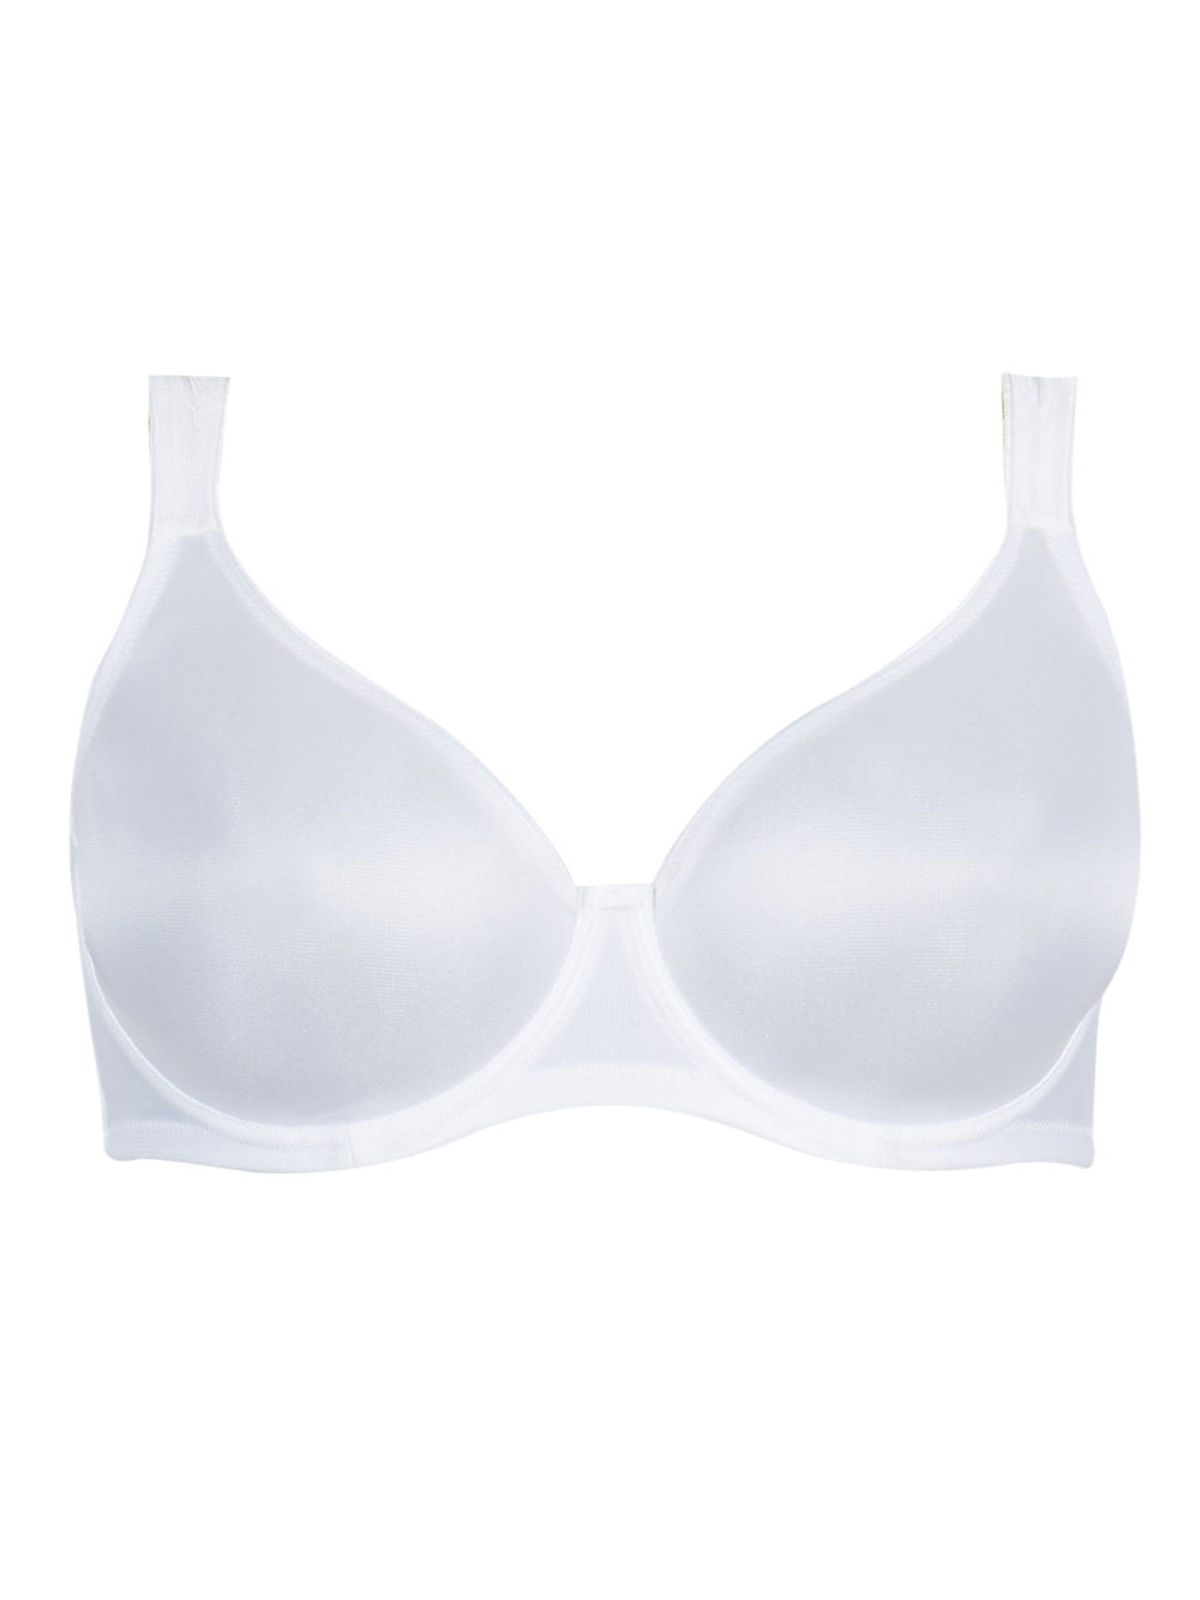 Marks and Spencer - - M&5 WHITE Smoothing Underwired Minimiser Full Cup ...